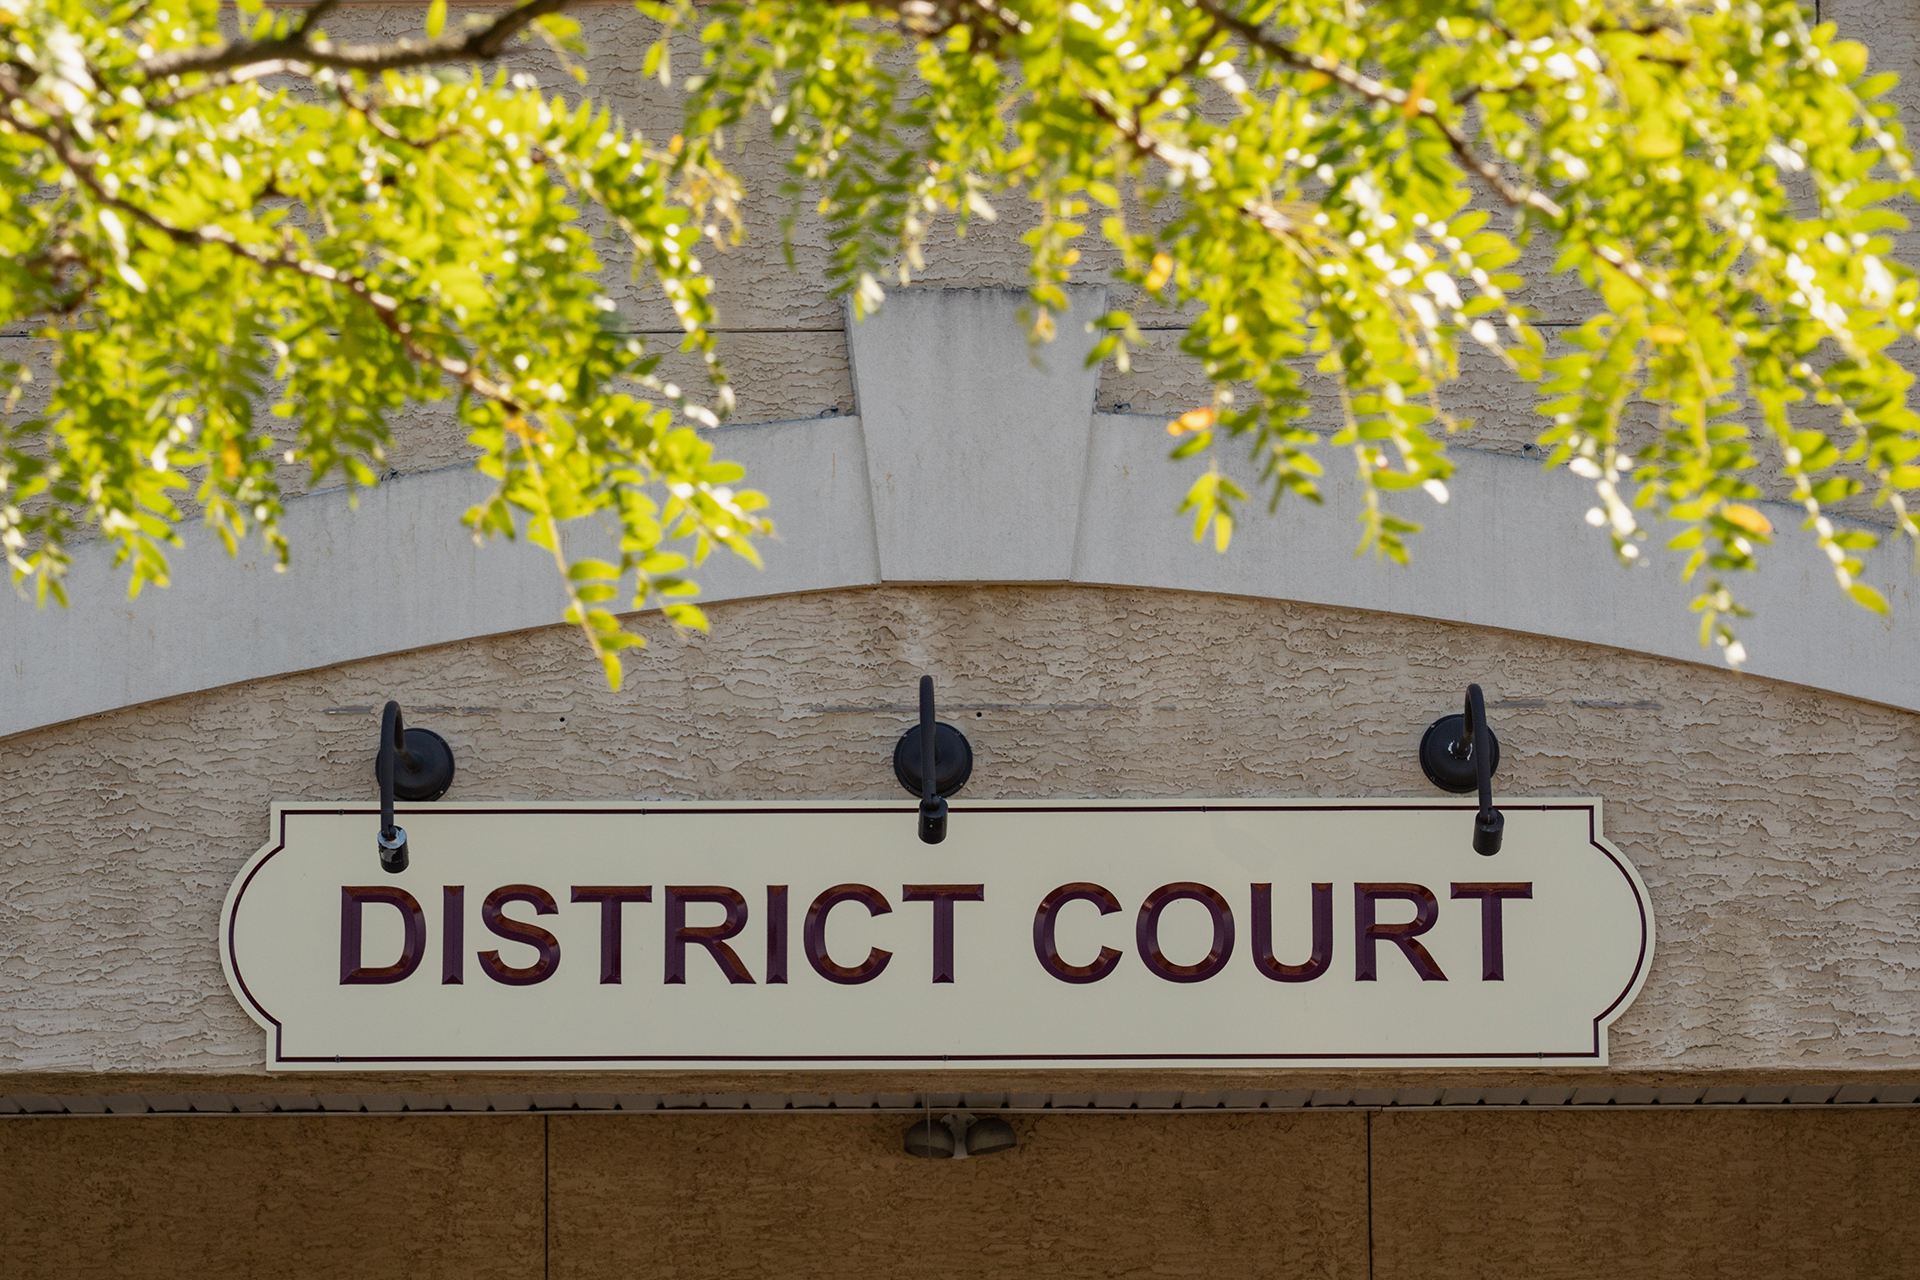 A sign displaying District Court in front of a granite building.